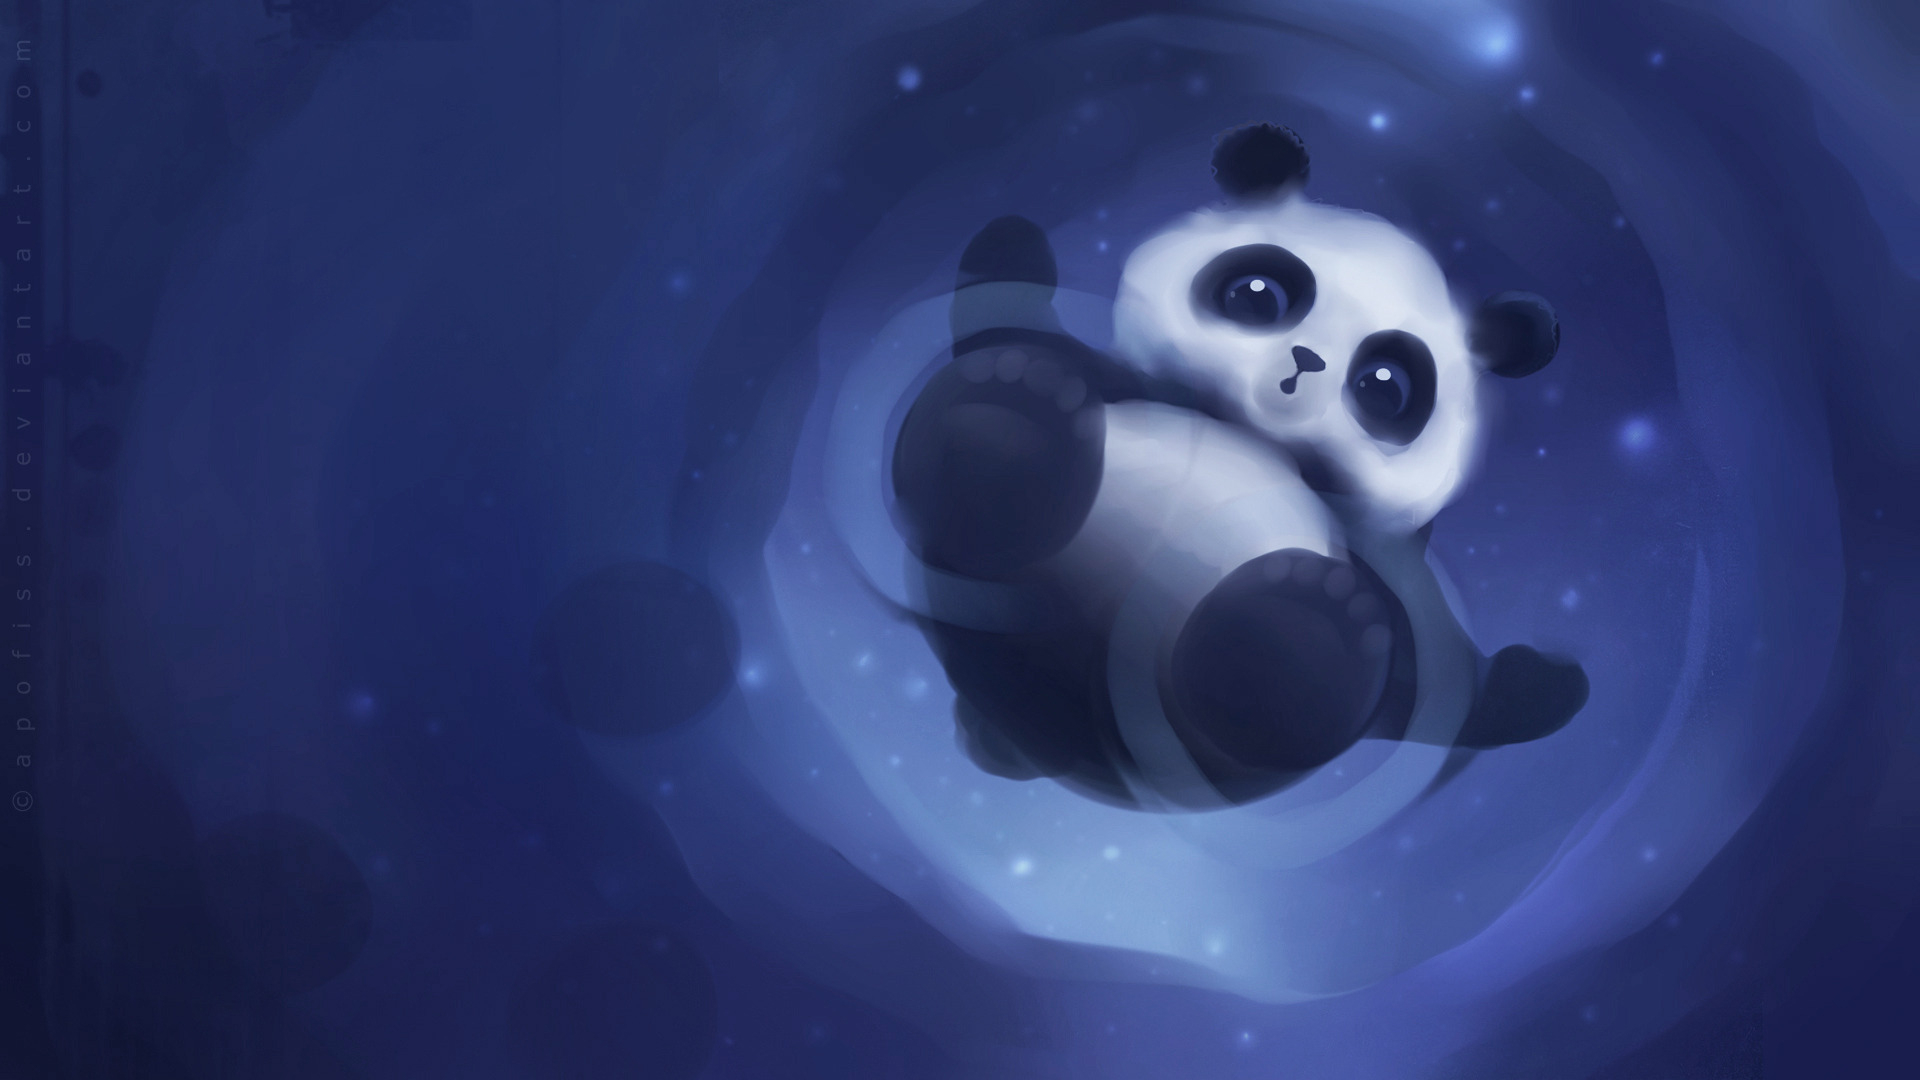 pictures, animals, pandas, blue phone background